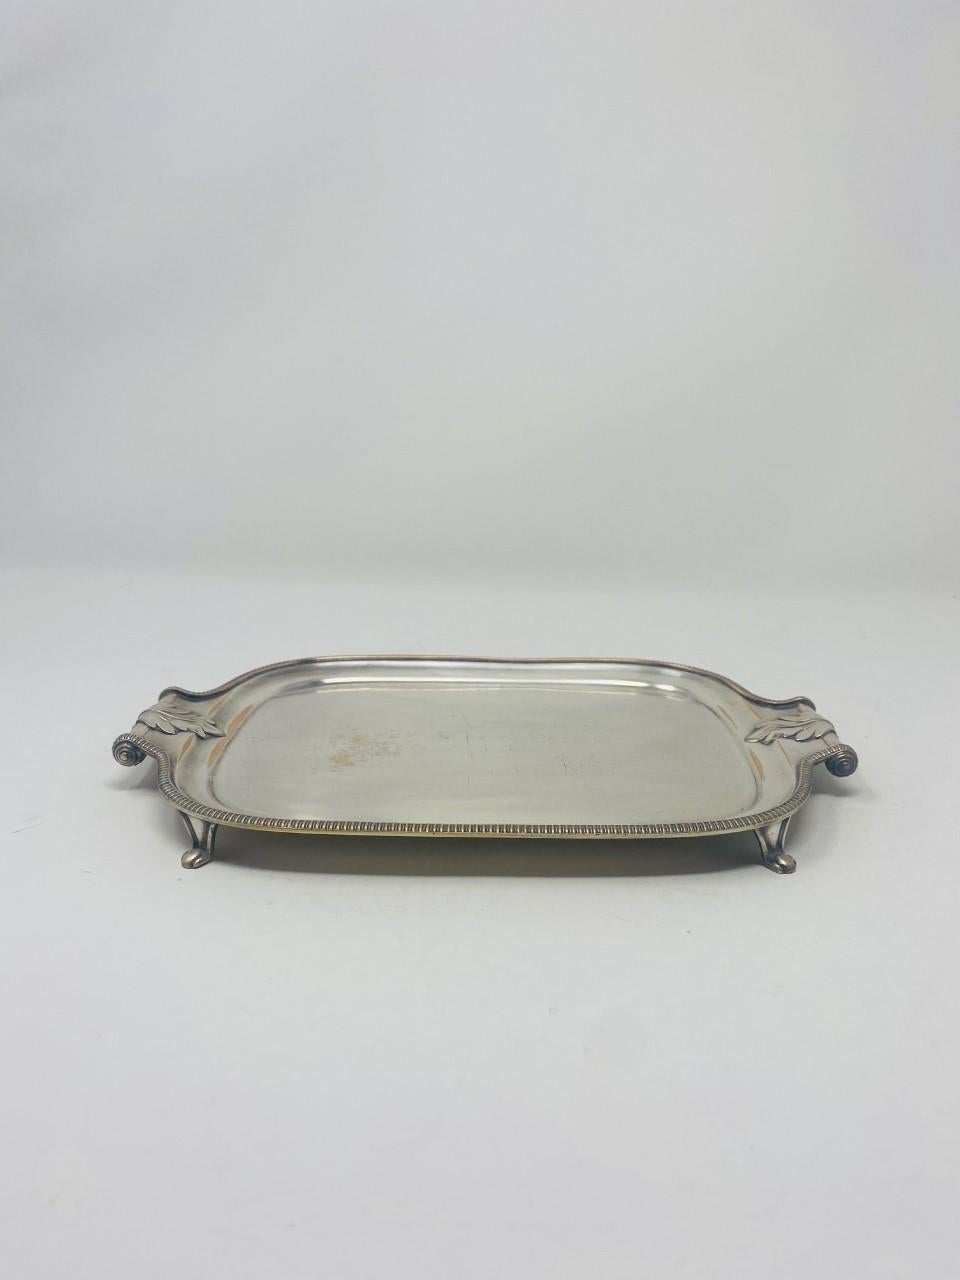 Vintage Silver Plated Menorah Tray with Handles Made in England In Good Condition For Sale In San Diego, CA